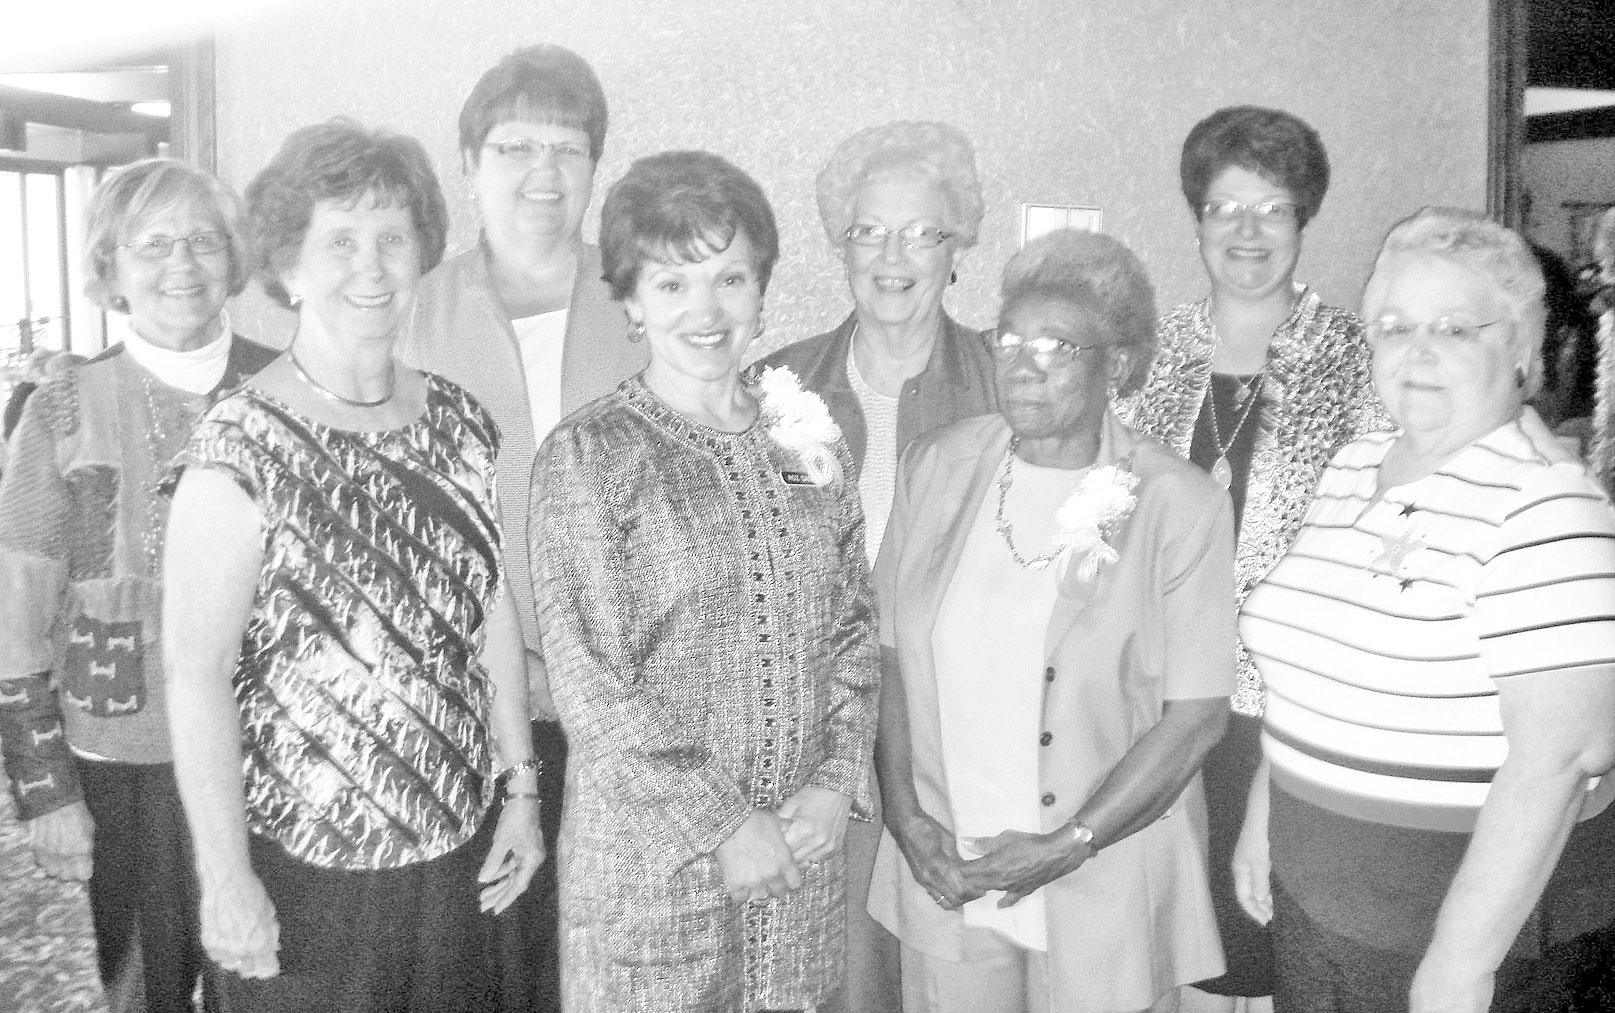 
Trumbull Retired Teachers, from left to right, Barb Wright, Betty Jean Behmer, Linda Cowin, Roselyn Gadd, Gretchen Reed, Hattie McNeal, Denise DelTondo and Ruby Hawkins, attended the SCOPE Honors Luncheon at the Trumbull Country Club, during which TRTA nominee Gadd won the Honor Award for media. 